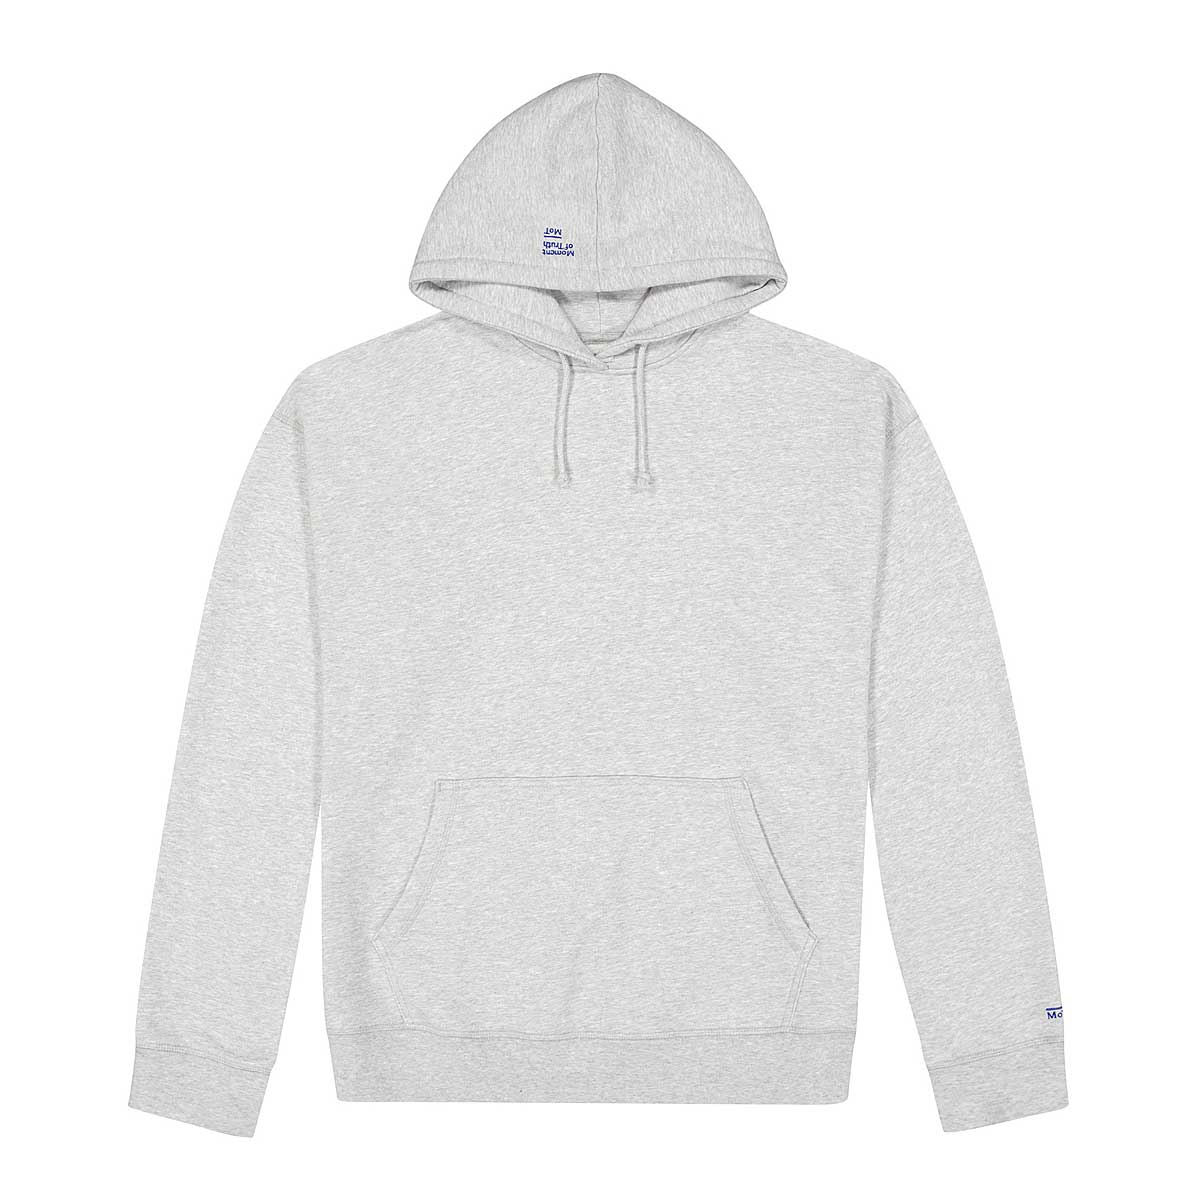 Moment Of Truth Lux Hoody, Light Grey Heather